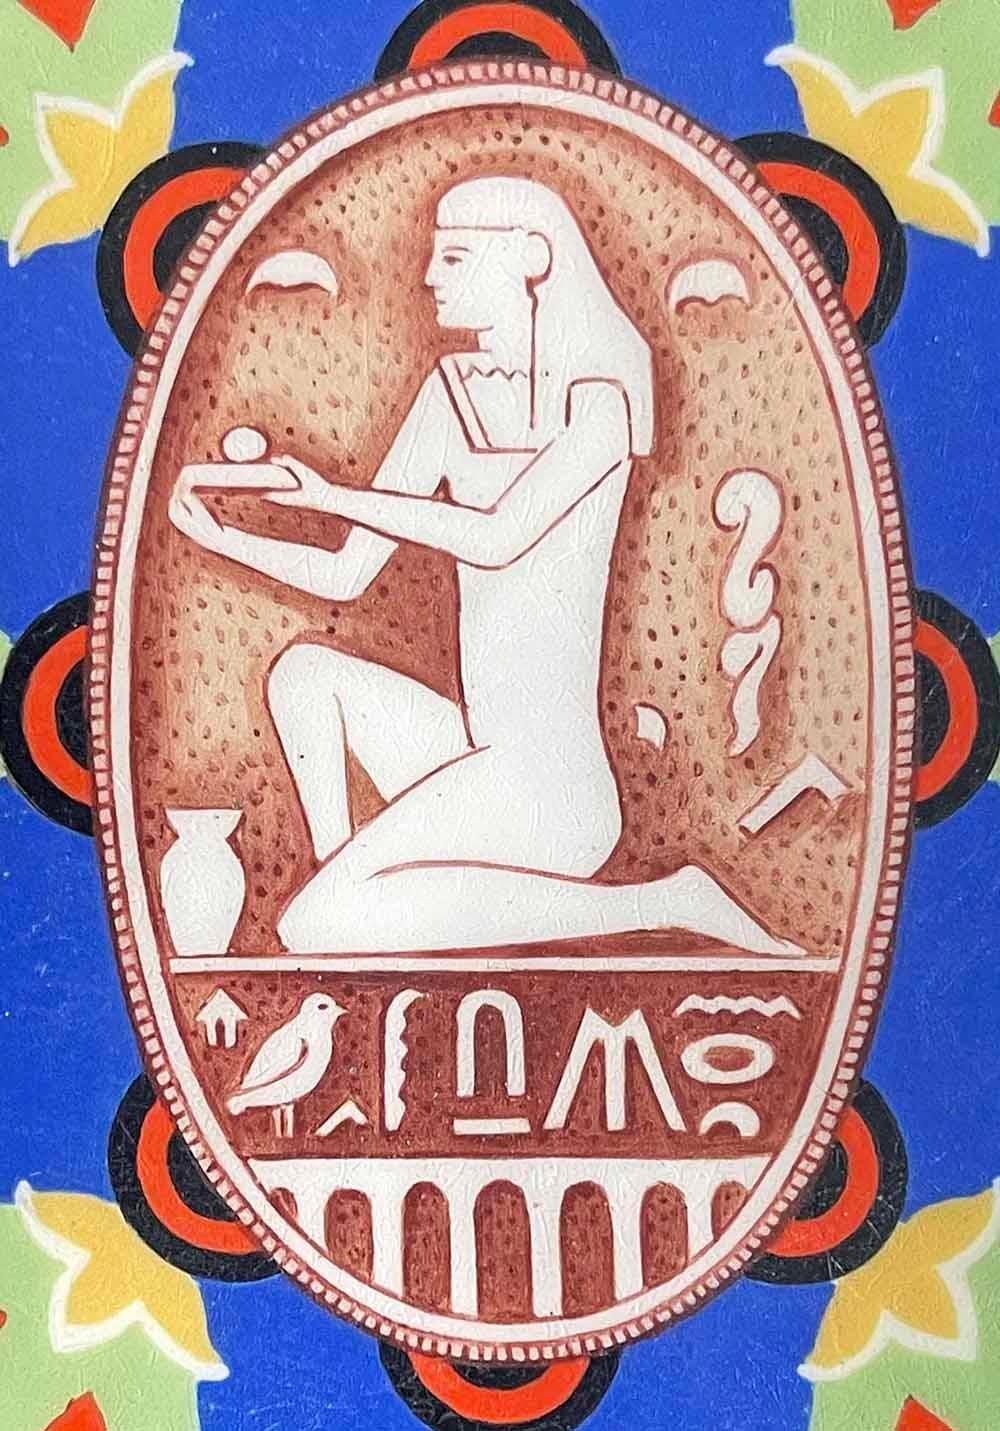 This rare -- perhaps unique -- enameled cigarette case or compact features a cartouche with a kneeling Egyptian figure surrounded by symbols and hieroglyphics on its lid, all in tones of royal blue, mint green, orange-red and spring green. The back